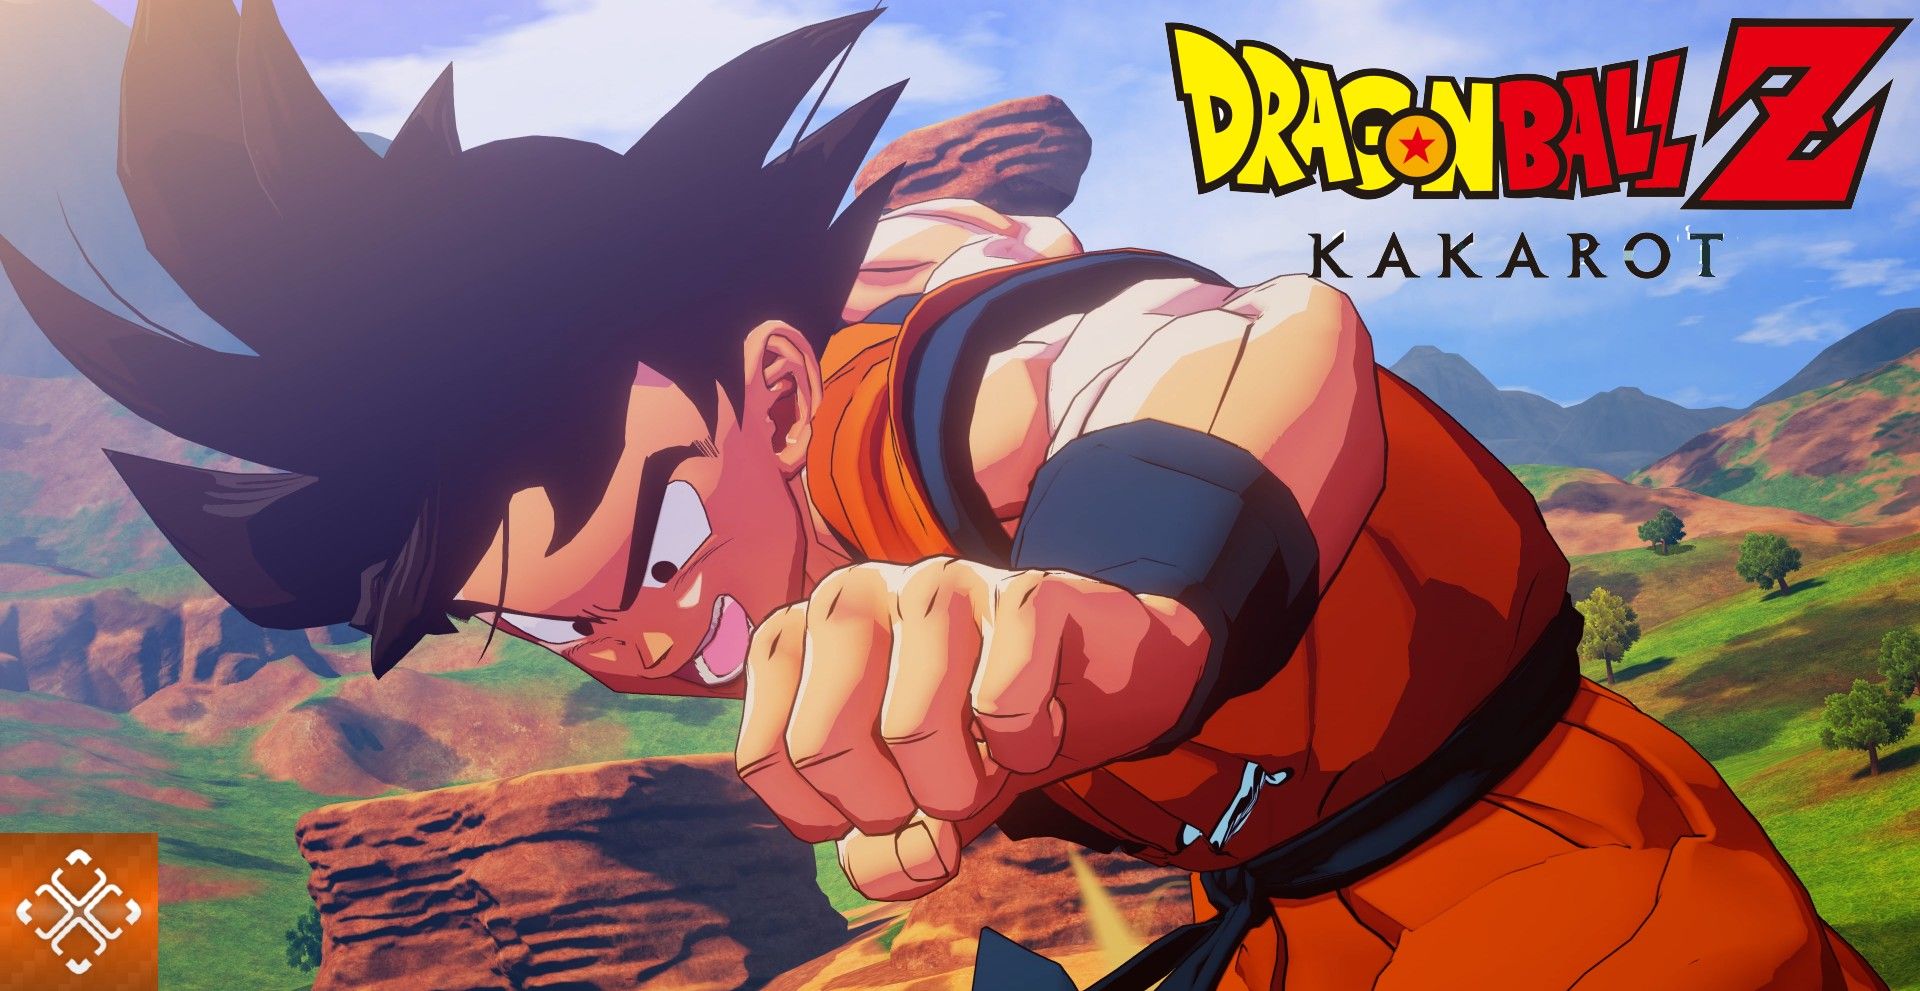 Dragon Ball Z Tutorial: A Tale Of Kakarot By Way Of A Narrative